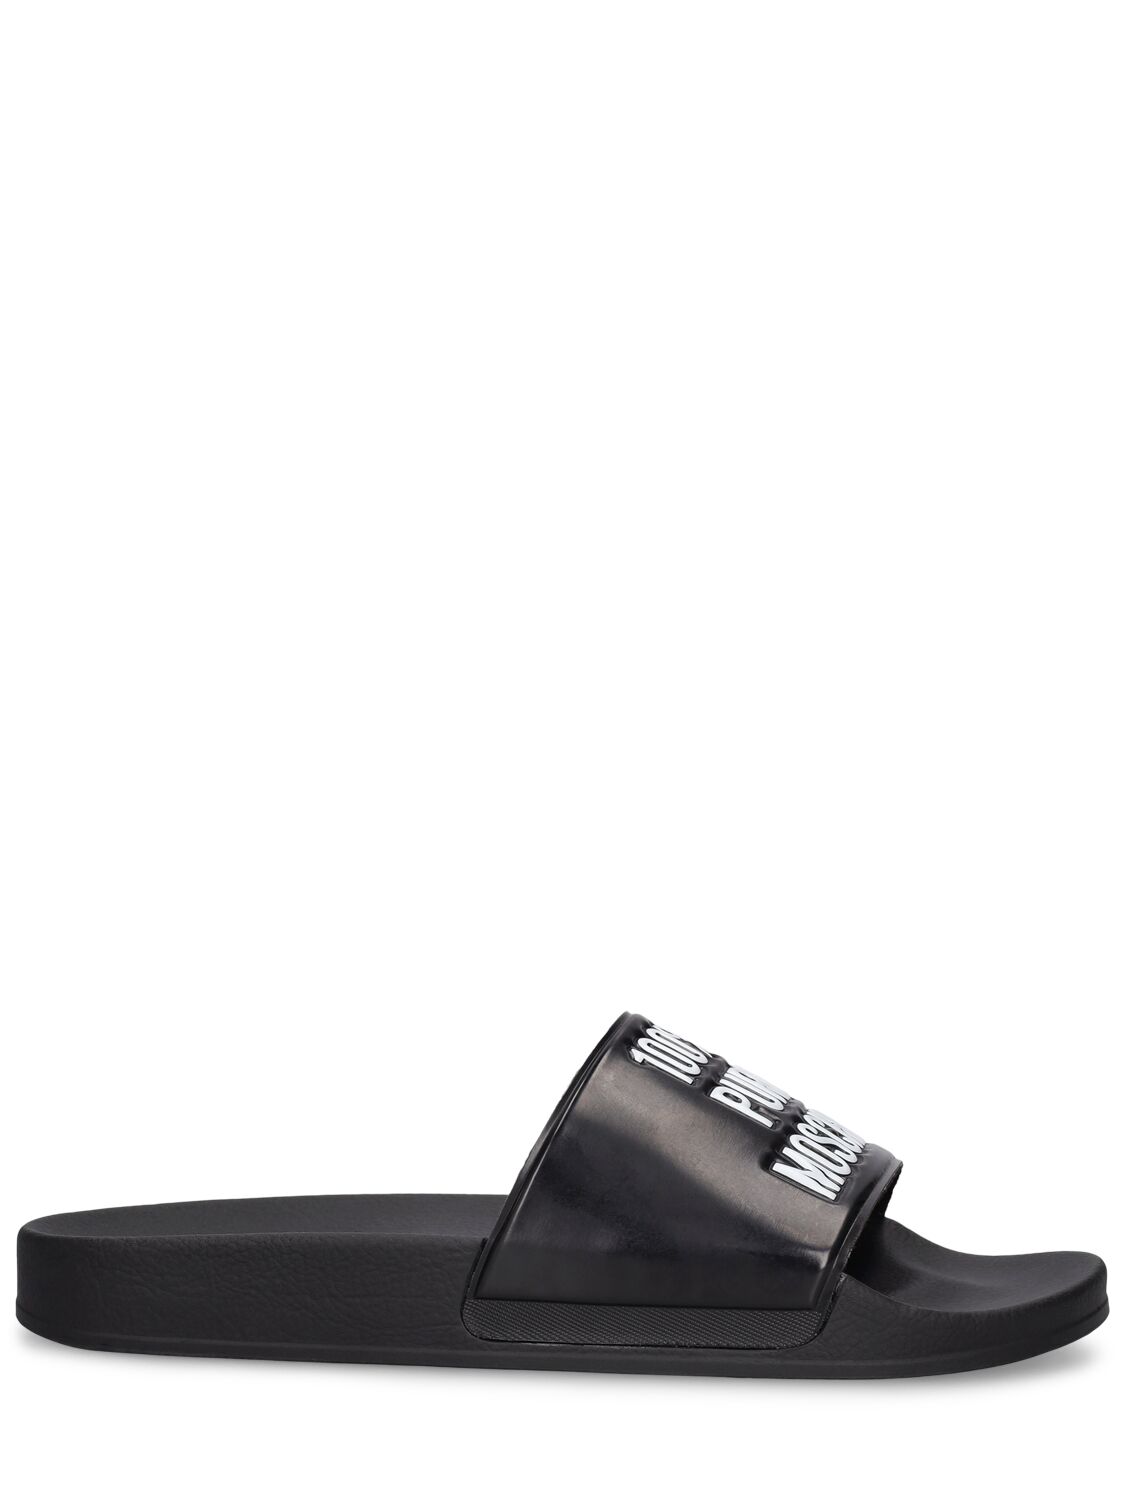 Moschino 100% Pure  Slide Sandals In Black